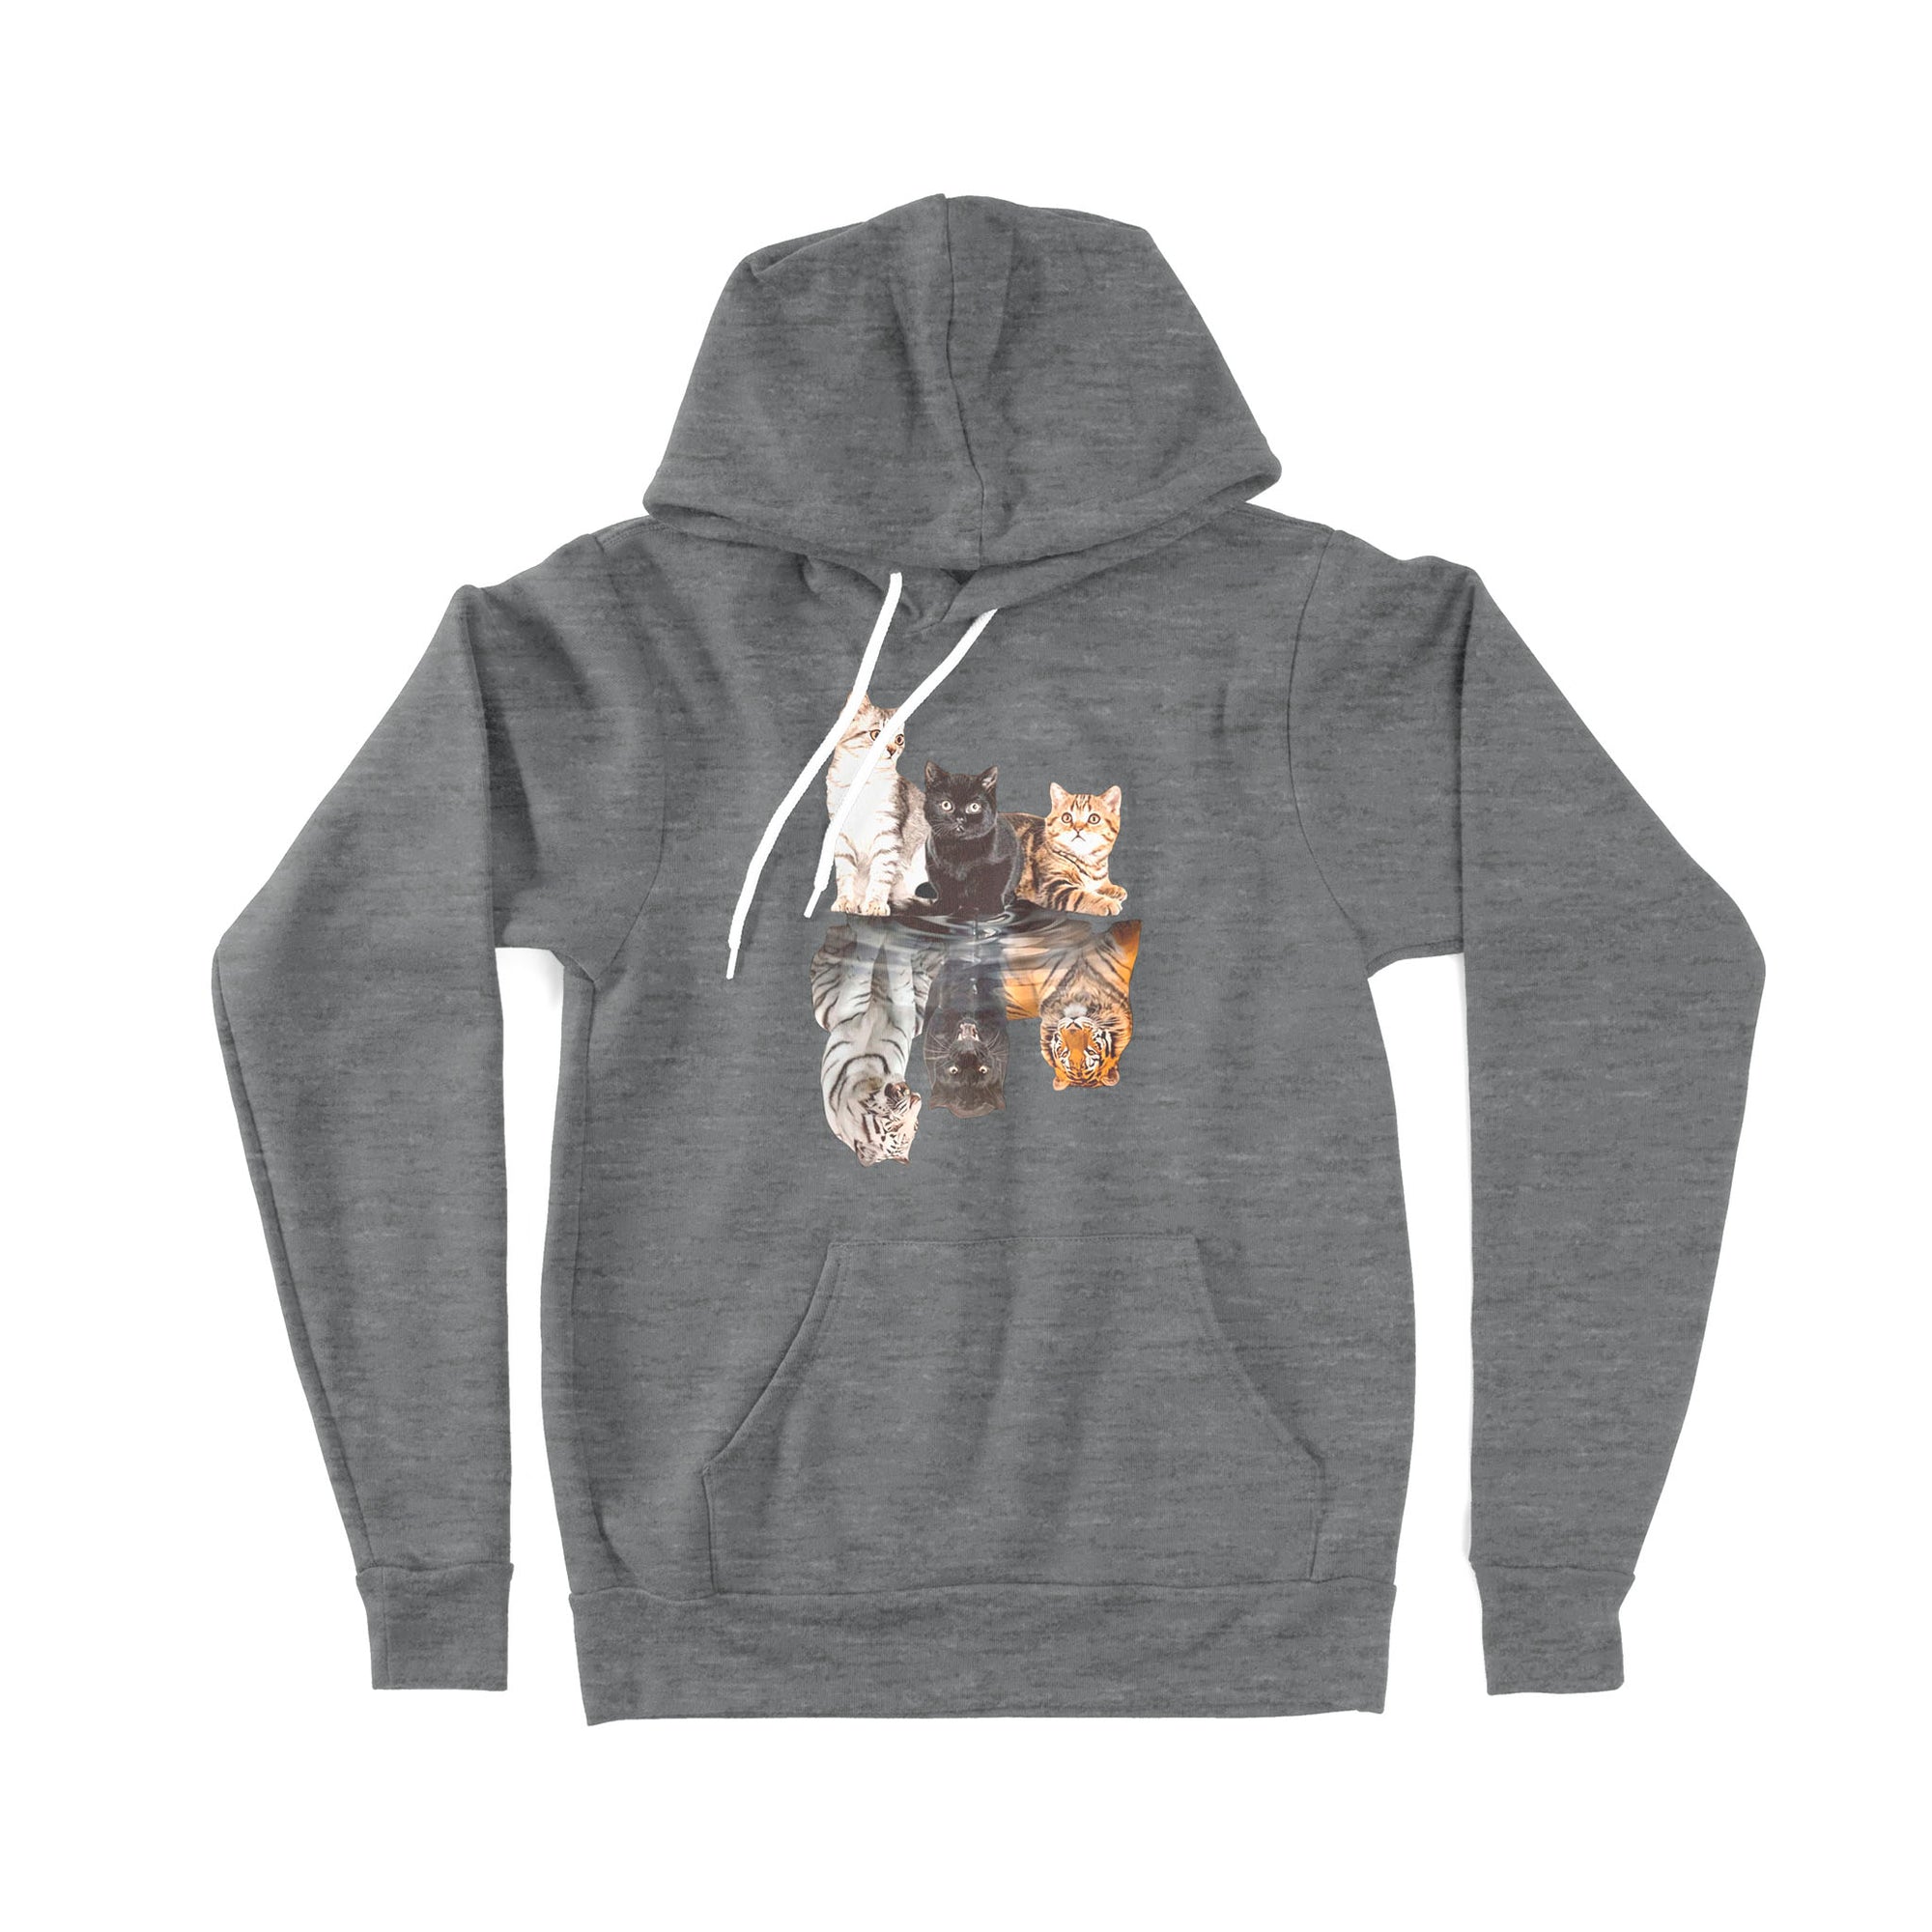 The Cats Water Mirror Reflection Tigers - Premium Hoodie